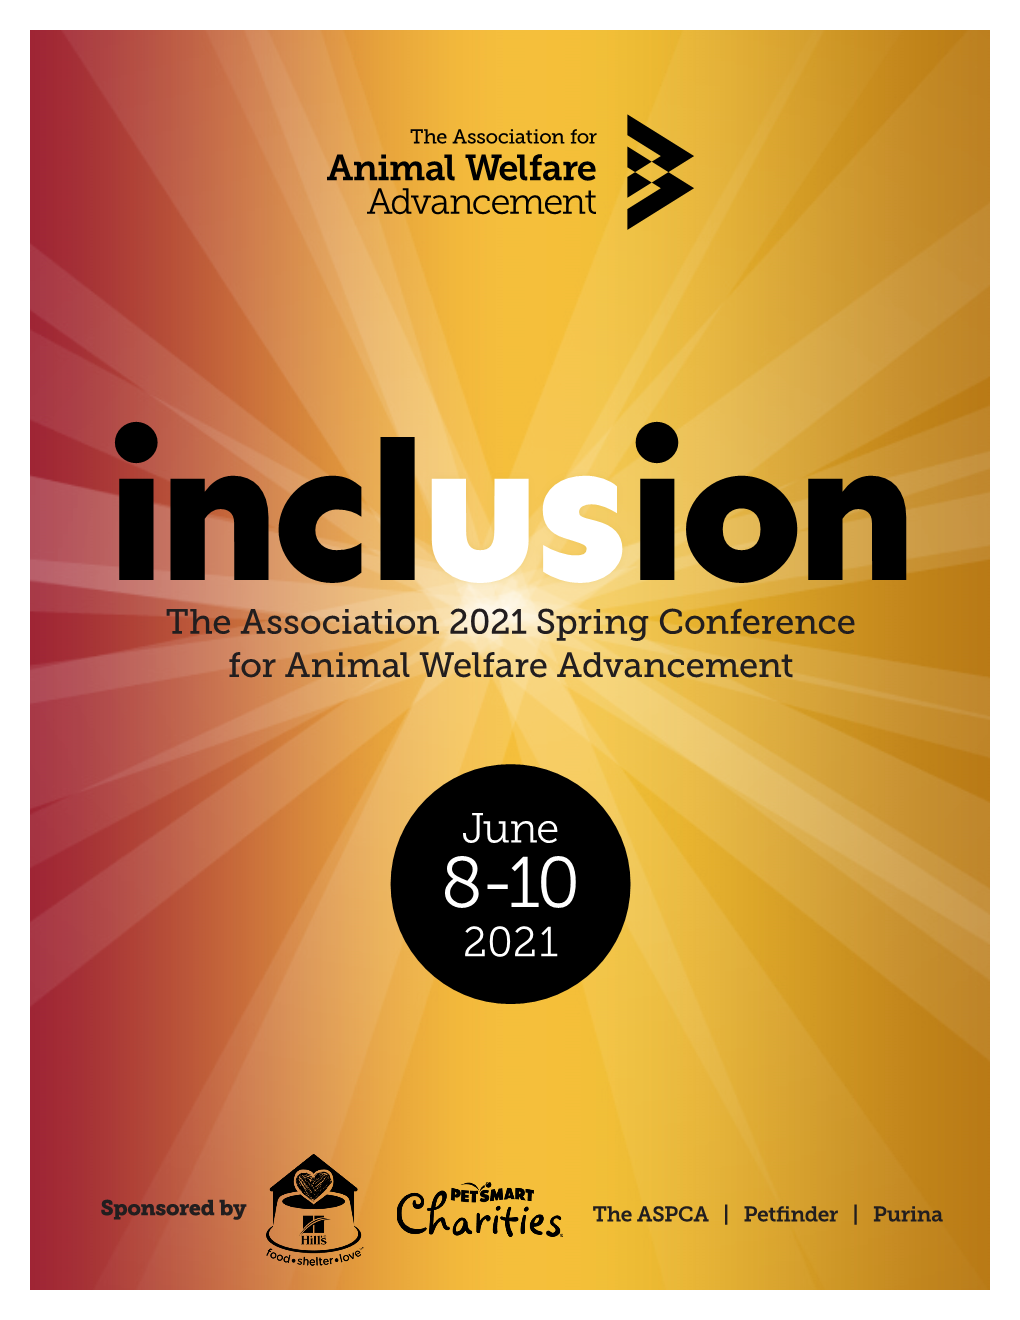 The Association 2021 Spring Conference for Animal Welfare Advancement